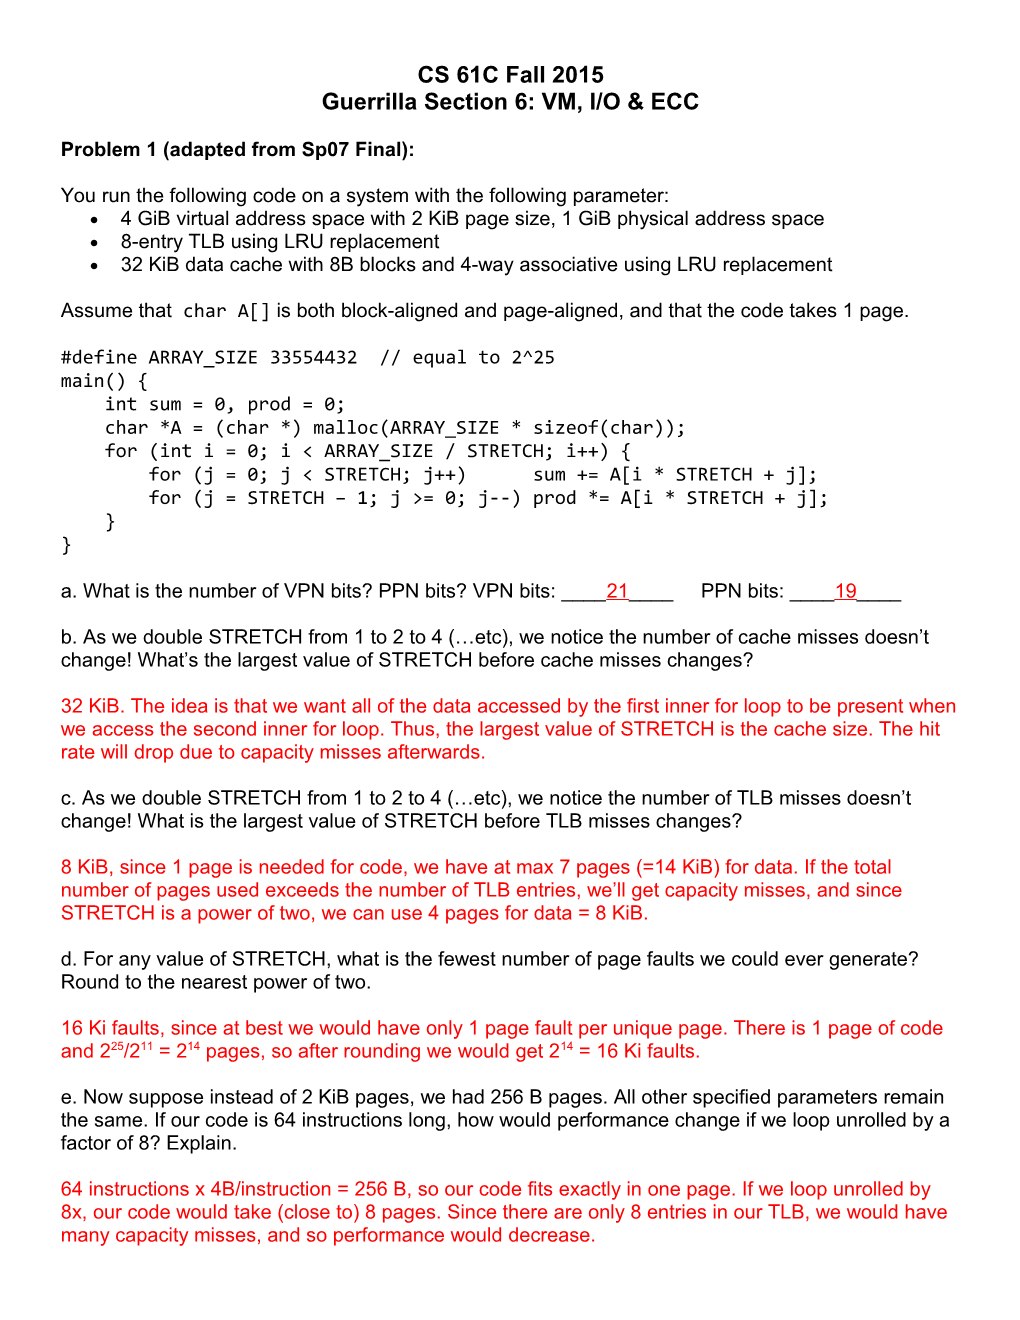 Problem 1 (Adapted from Sp07 Final)